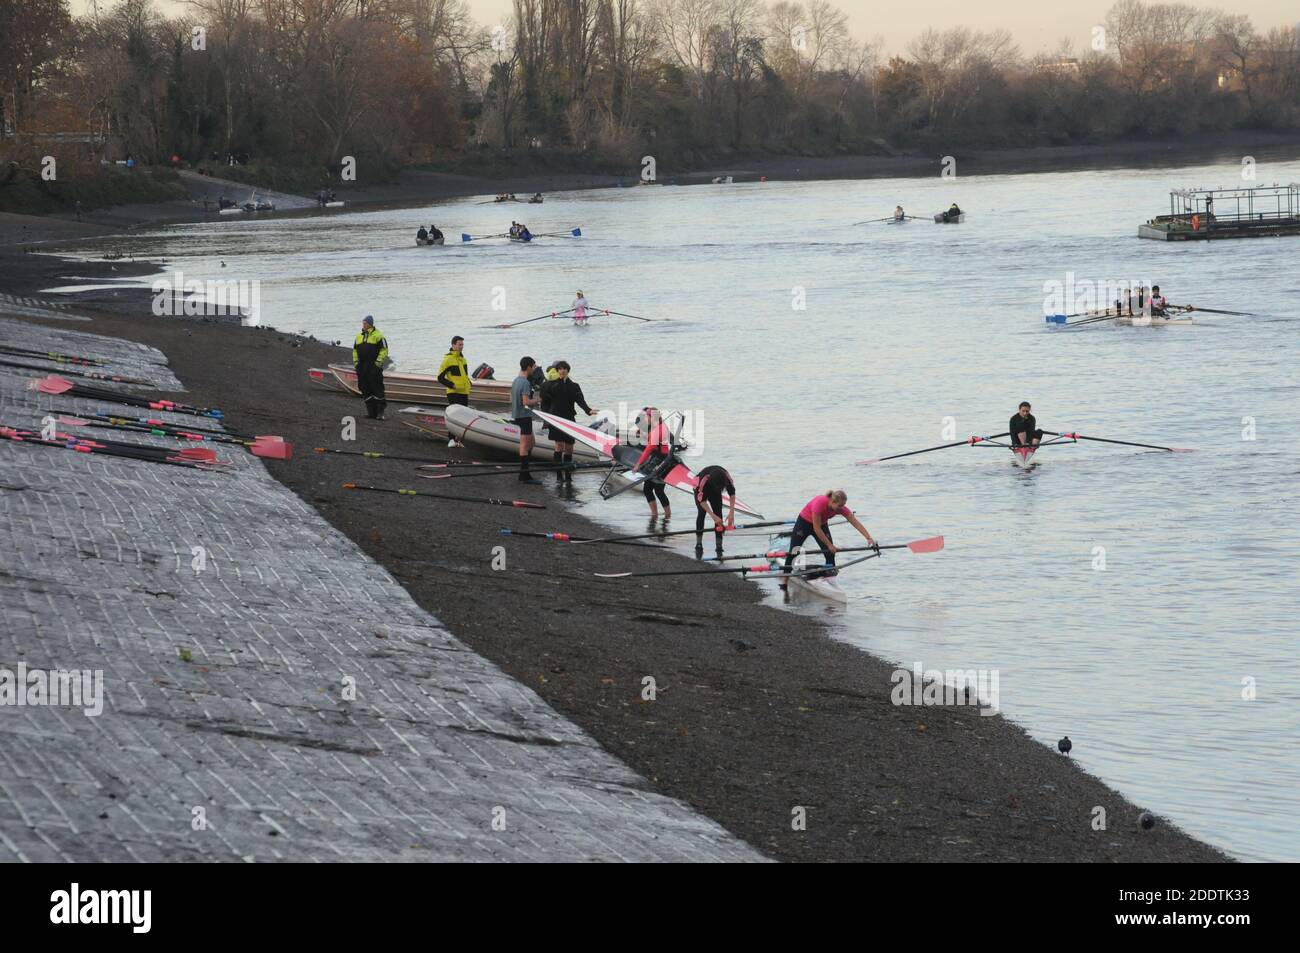 London, UK. 26th Nov, 2020. Rowers practice at Putney boat clubs where the race traditionally starts. The Boat Race Company Limited (BRCL) today announced that The Boat Race between Oxford and Cambridge will be held on the Great Ouse at Ely in April 2021. The event will see the 166th Men's and the 75th Women's boat races. The decision to relocate the 2021 event reflects the challenge of planning a high-profile amateur event around continuing COVID related restrictions as well as uncertainty regarding the safety and navigation of Hammersmith Bridge. Credit: JOHNNY ARMSTEAD/Alamy Live News Stock Photo